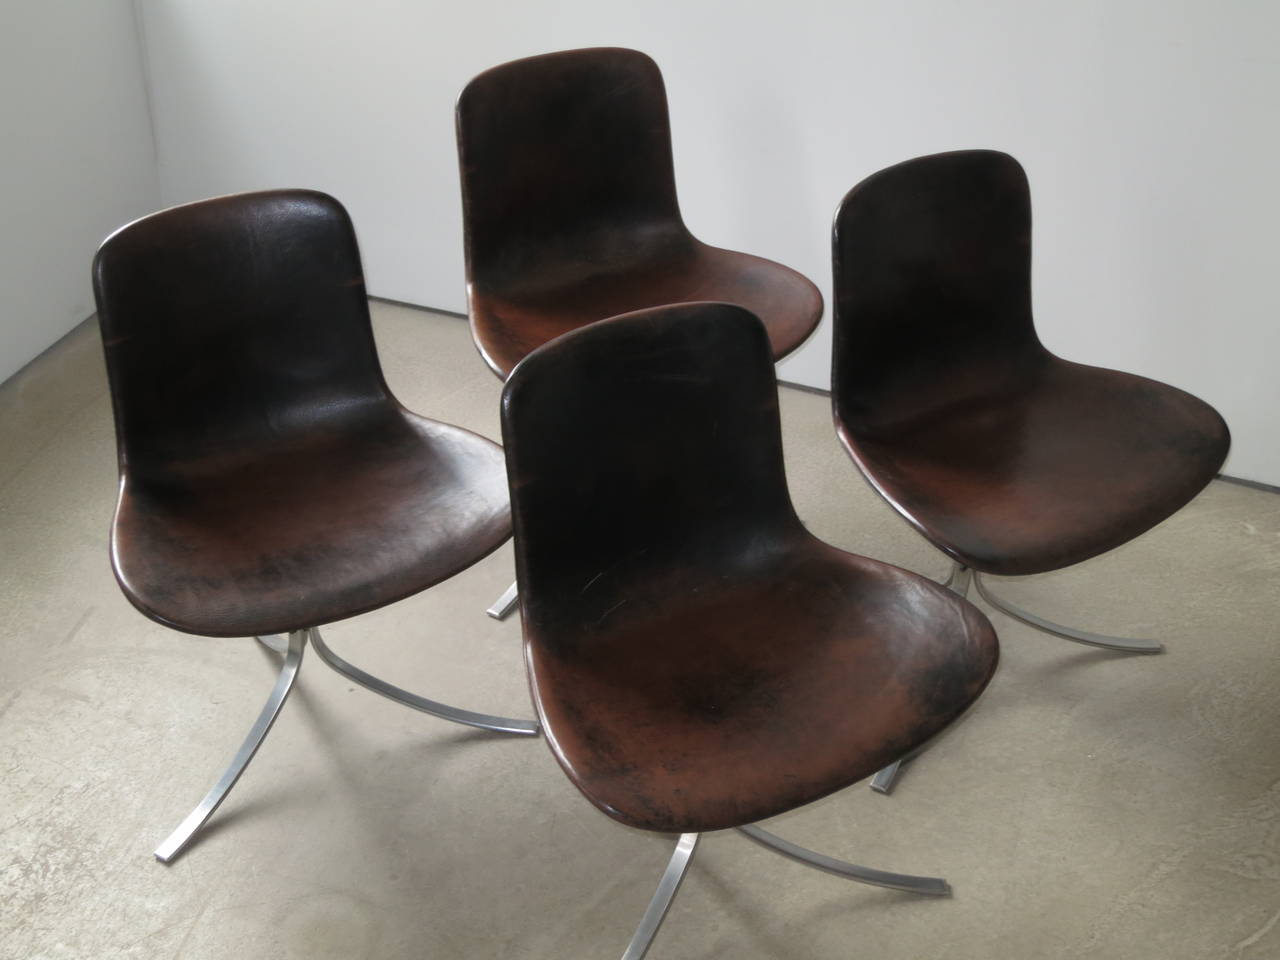 Designed in 1960 and considered one of Kjærholm's masterpieces, the leather seat and back of this chair sit on three beautifully curved steel legs in a way so as to appear to be floating. Its Minimalist design belies an incredible comfort, with